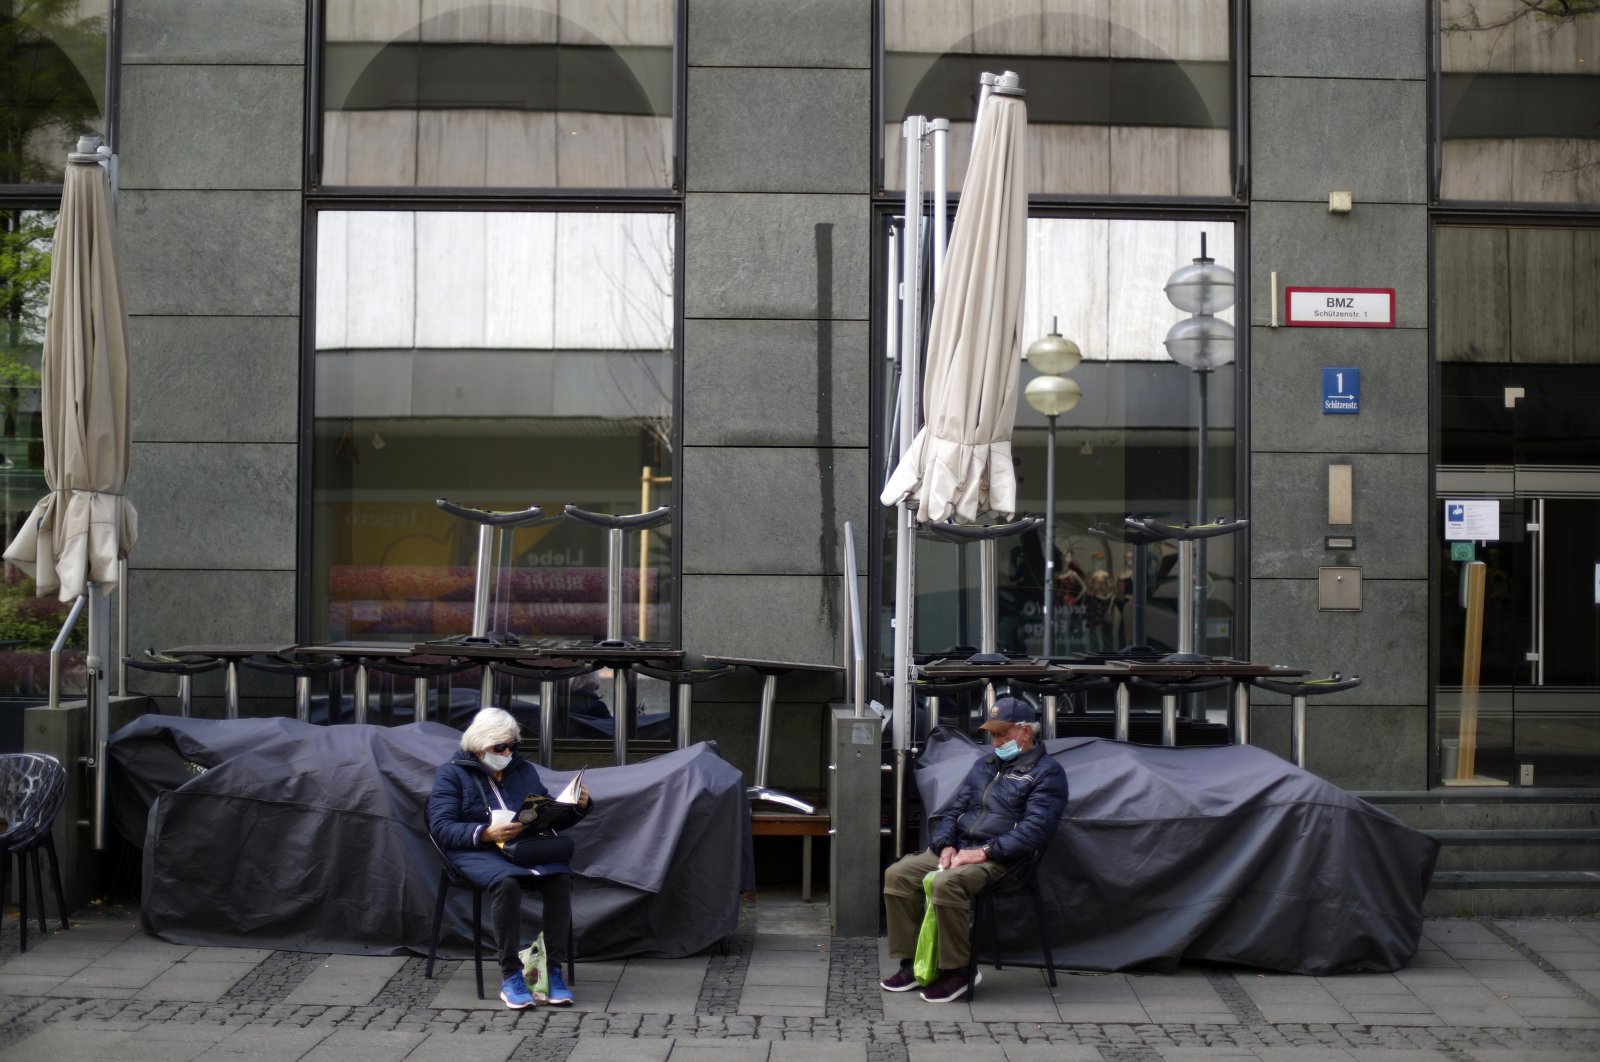 An elderly couple sits outside a closed bar during the lockdown due to the coronavirus outbreak downtown in Munich, Germany, May 9, 2020. (AP Photo)